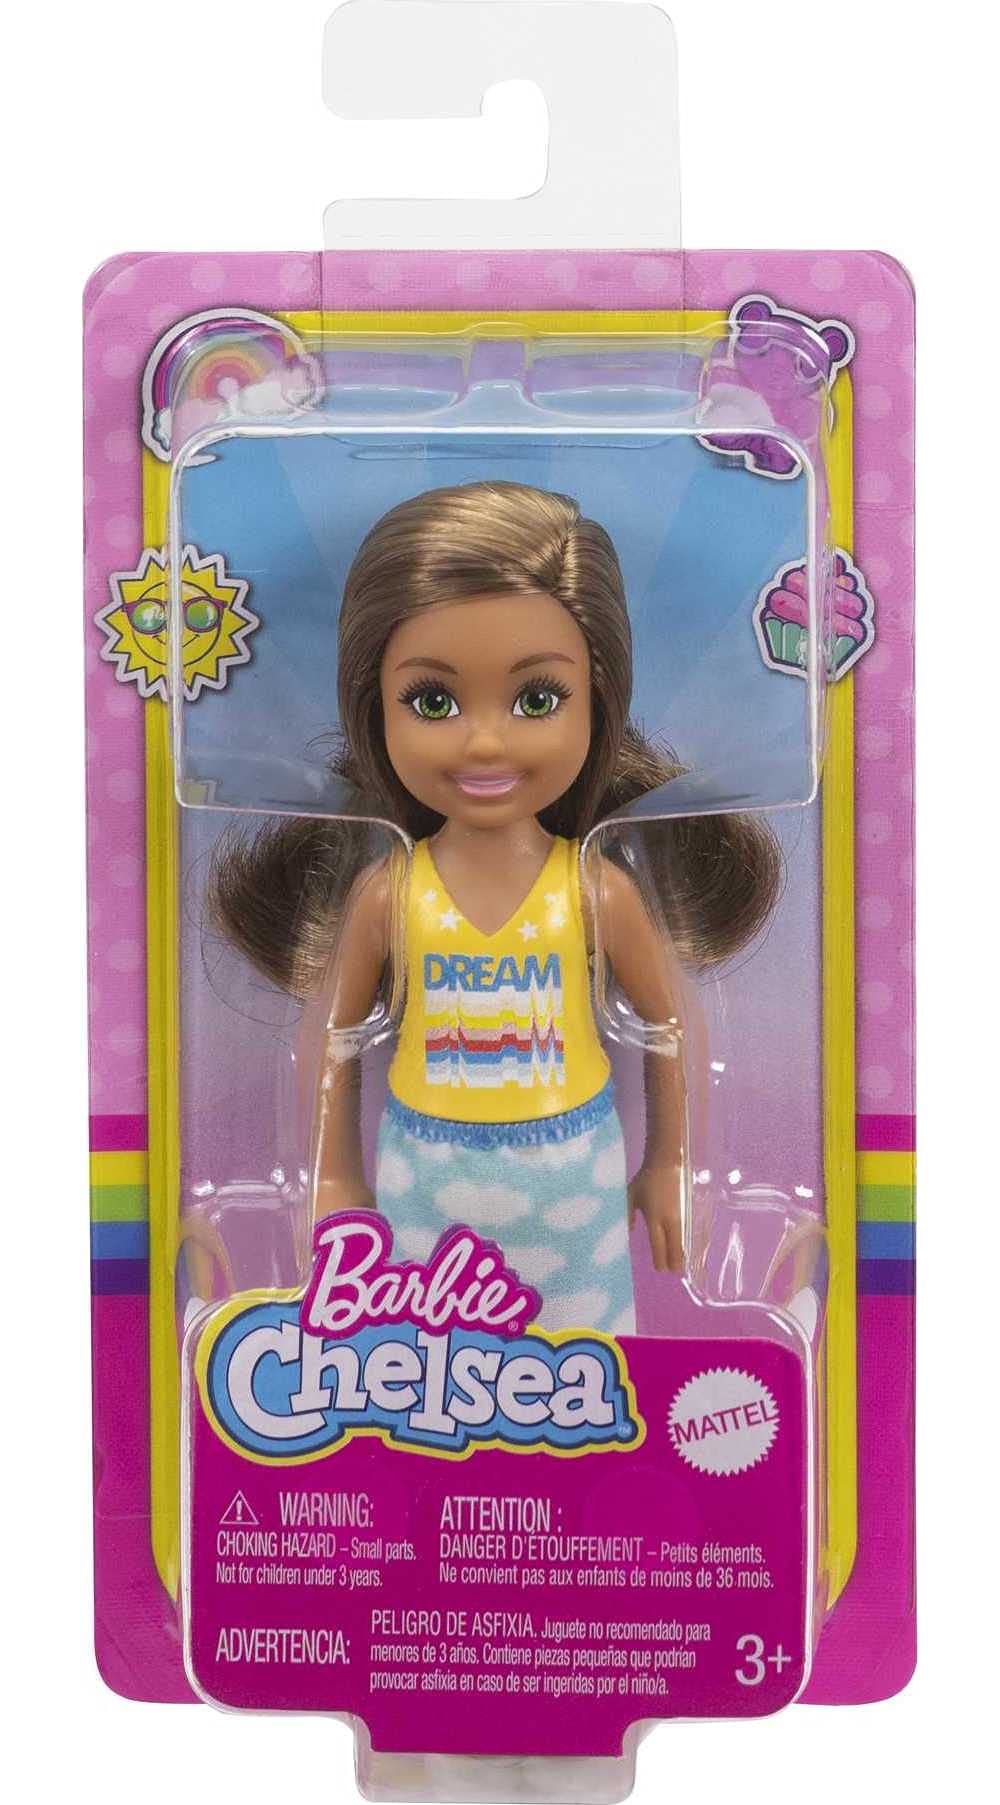 Barbie Chelsea Doll (6-inch Brunette) Wearing Skirt with Cloud Print and White Shoes, Gift for 3 to 7 Year Olds